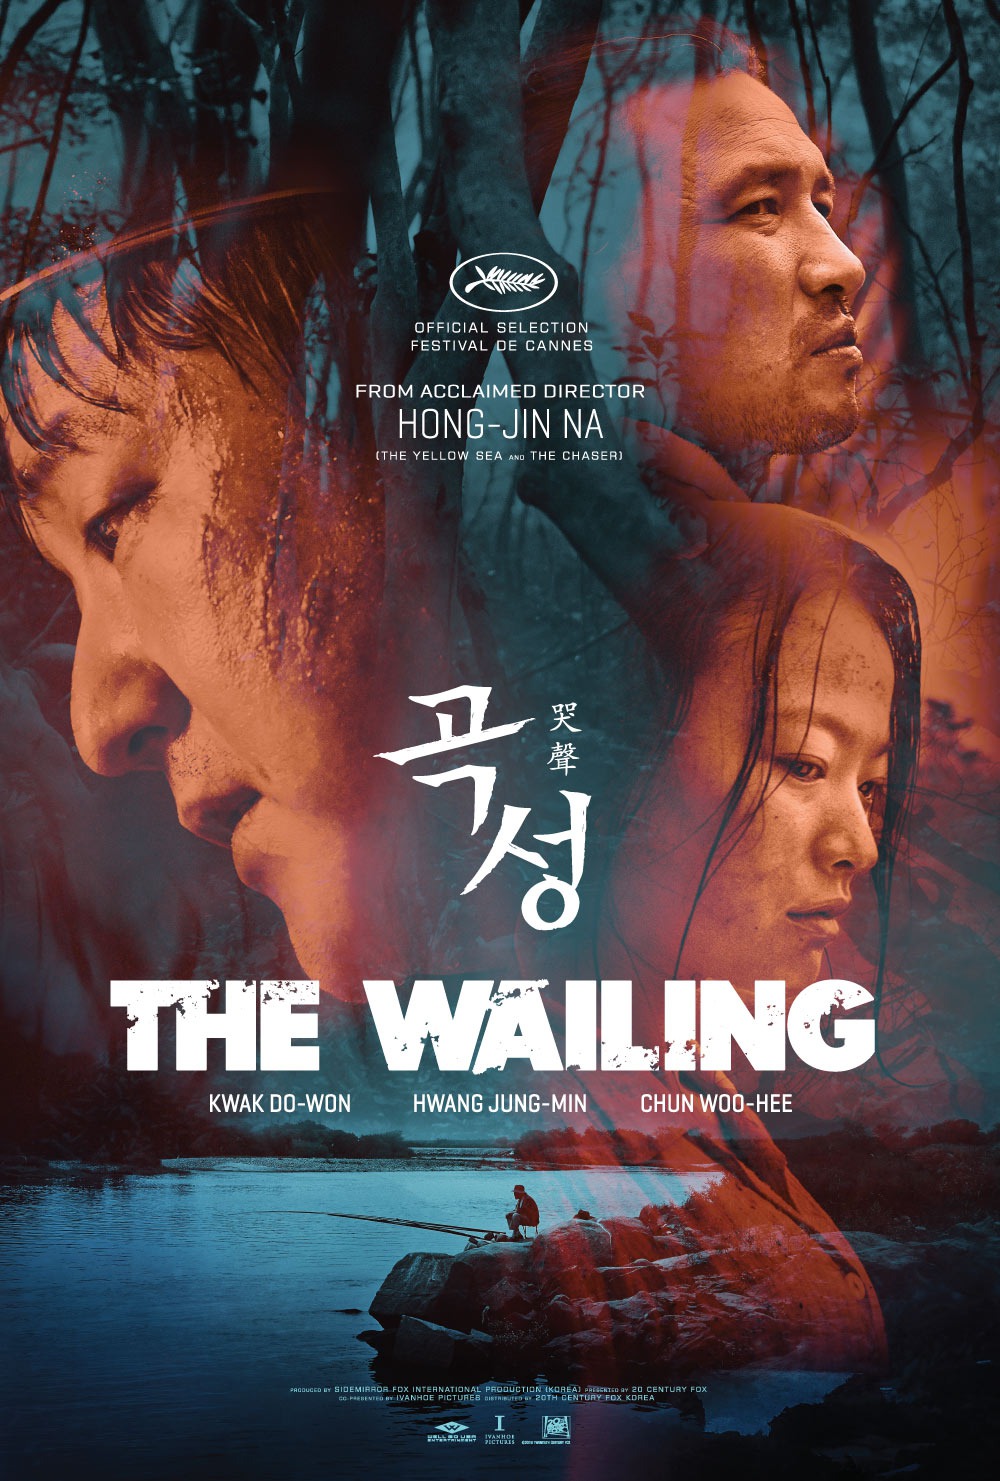 the wailing 2016 poster_xlg.jpg